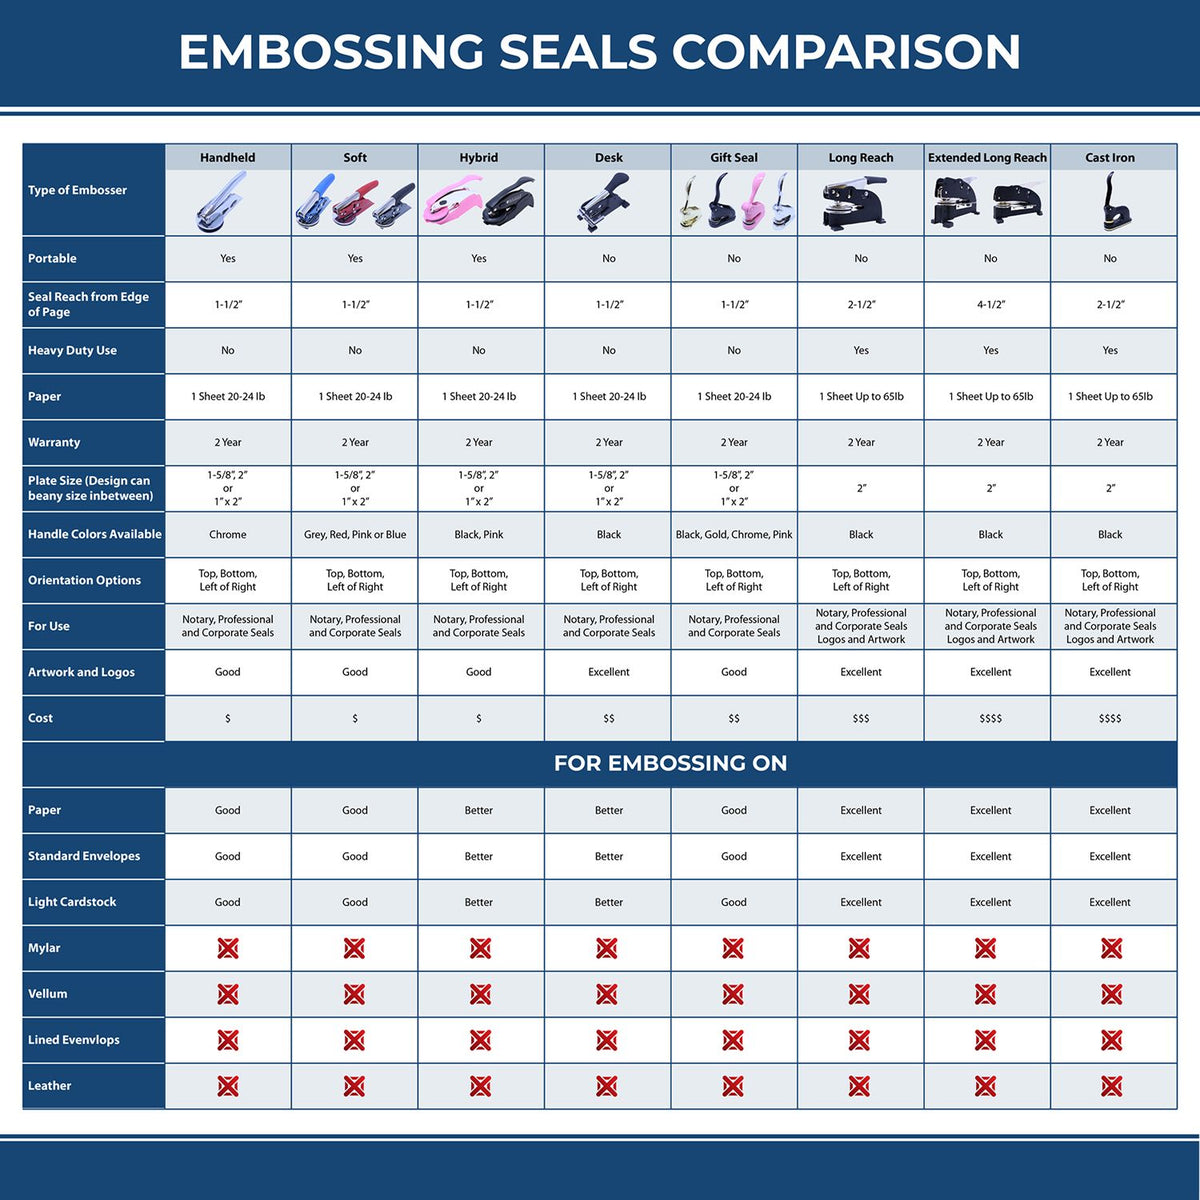 A comparison chart for the different types of mount models available for the State of South Dakota Extended Long Reach Engineer Seal.